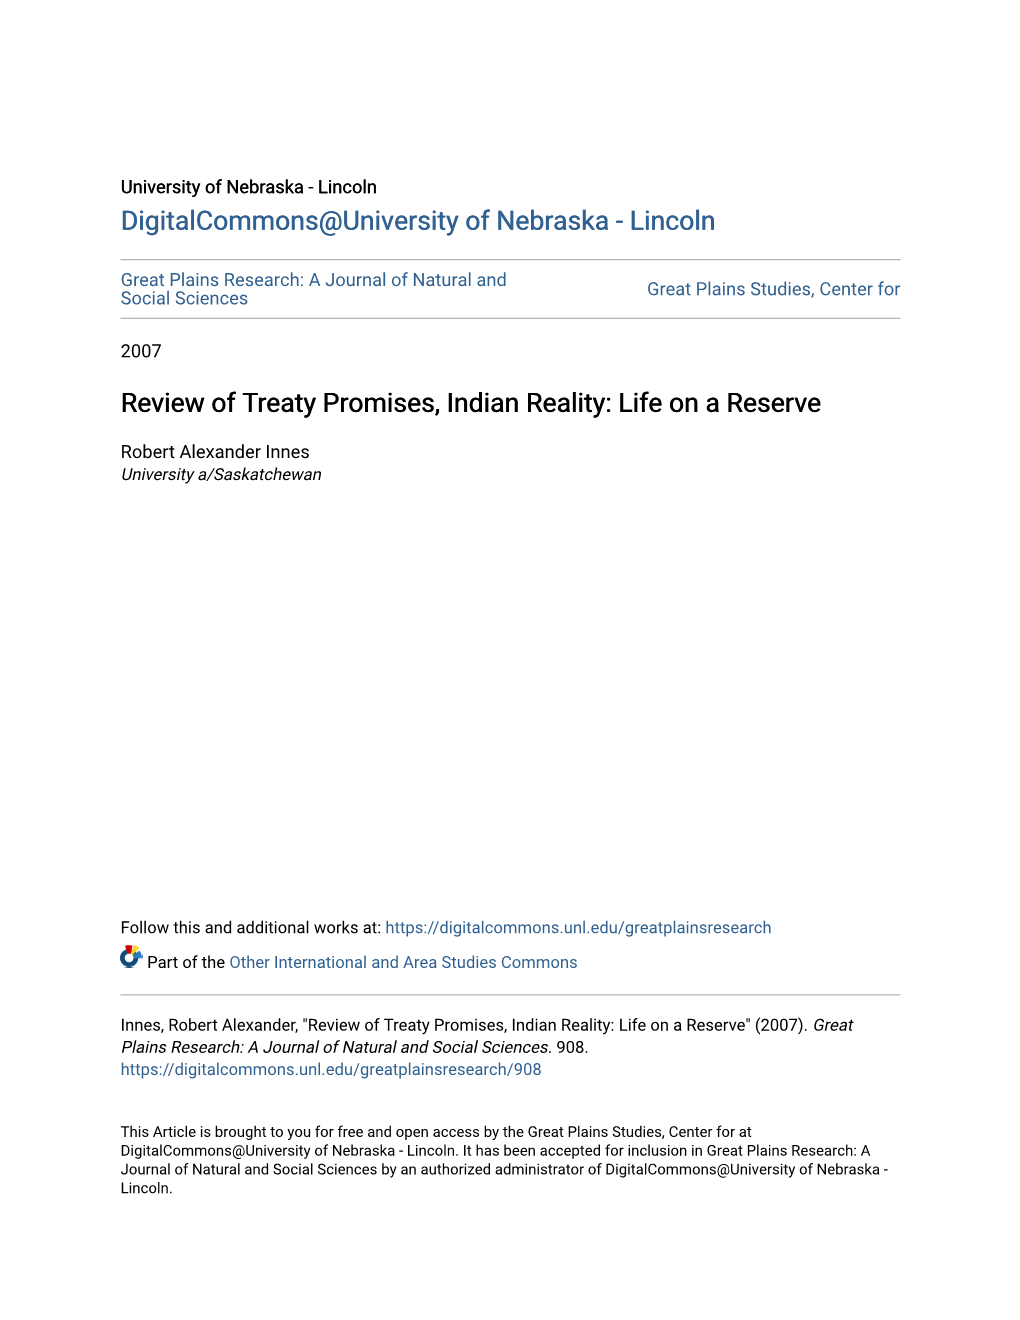 Review of Treaty Promises, Indian Reality: Life on a Reserve